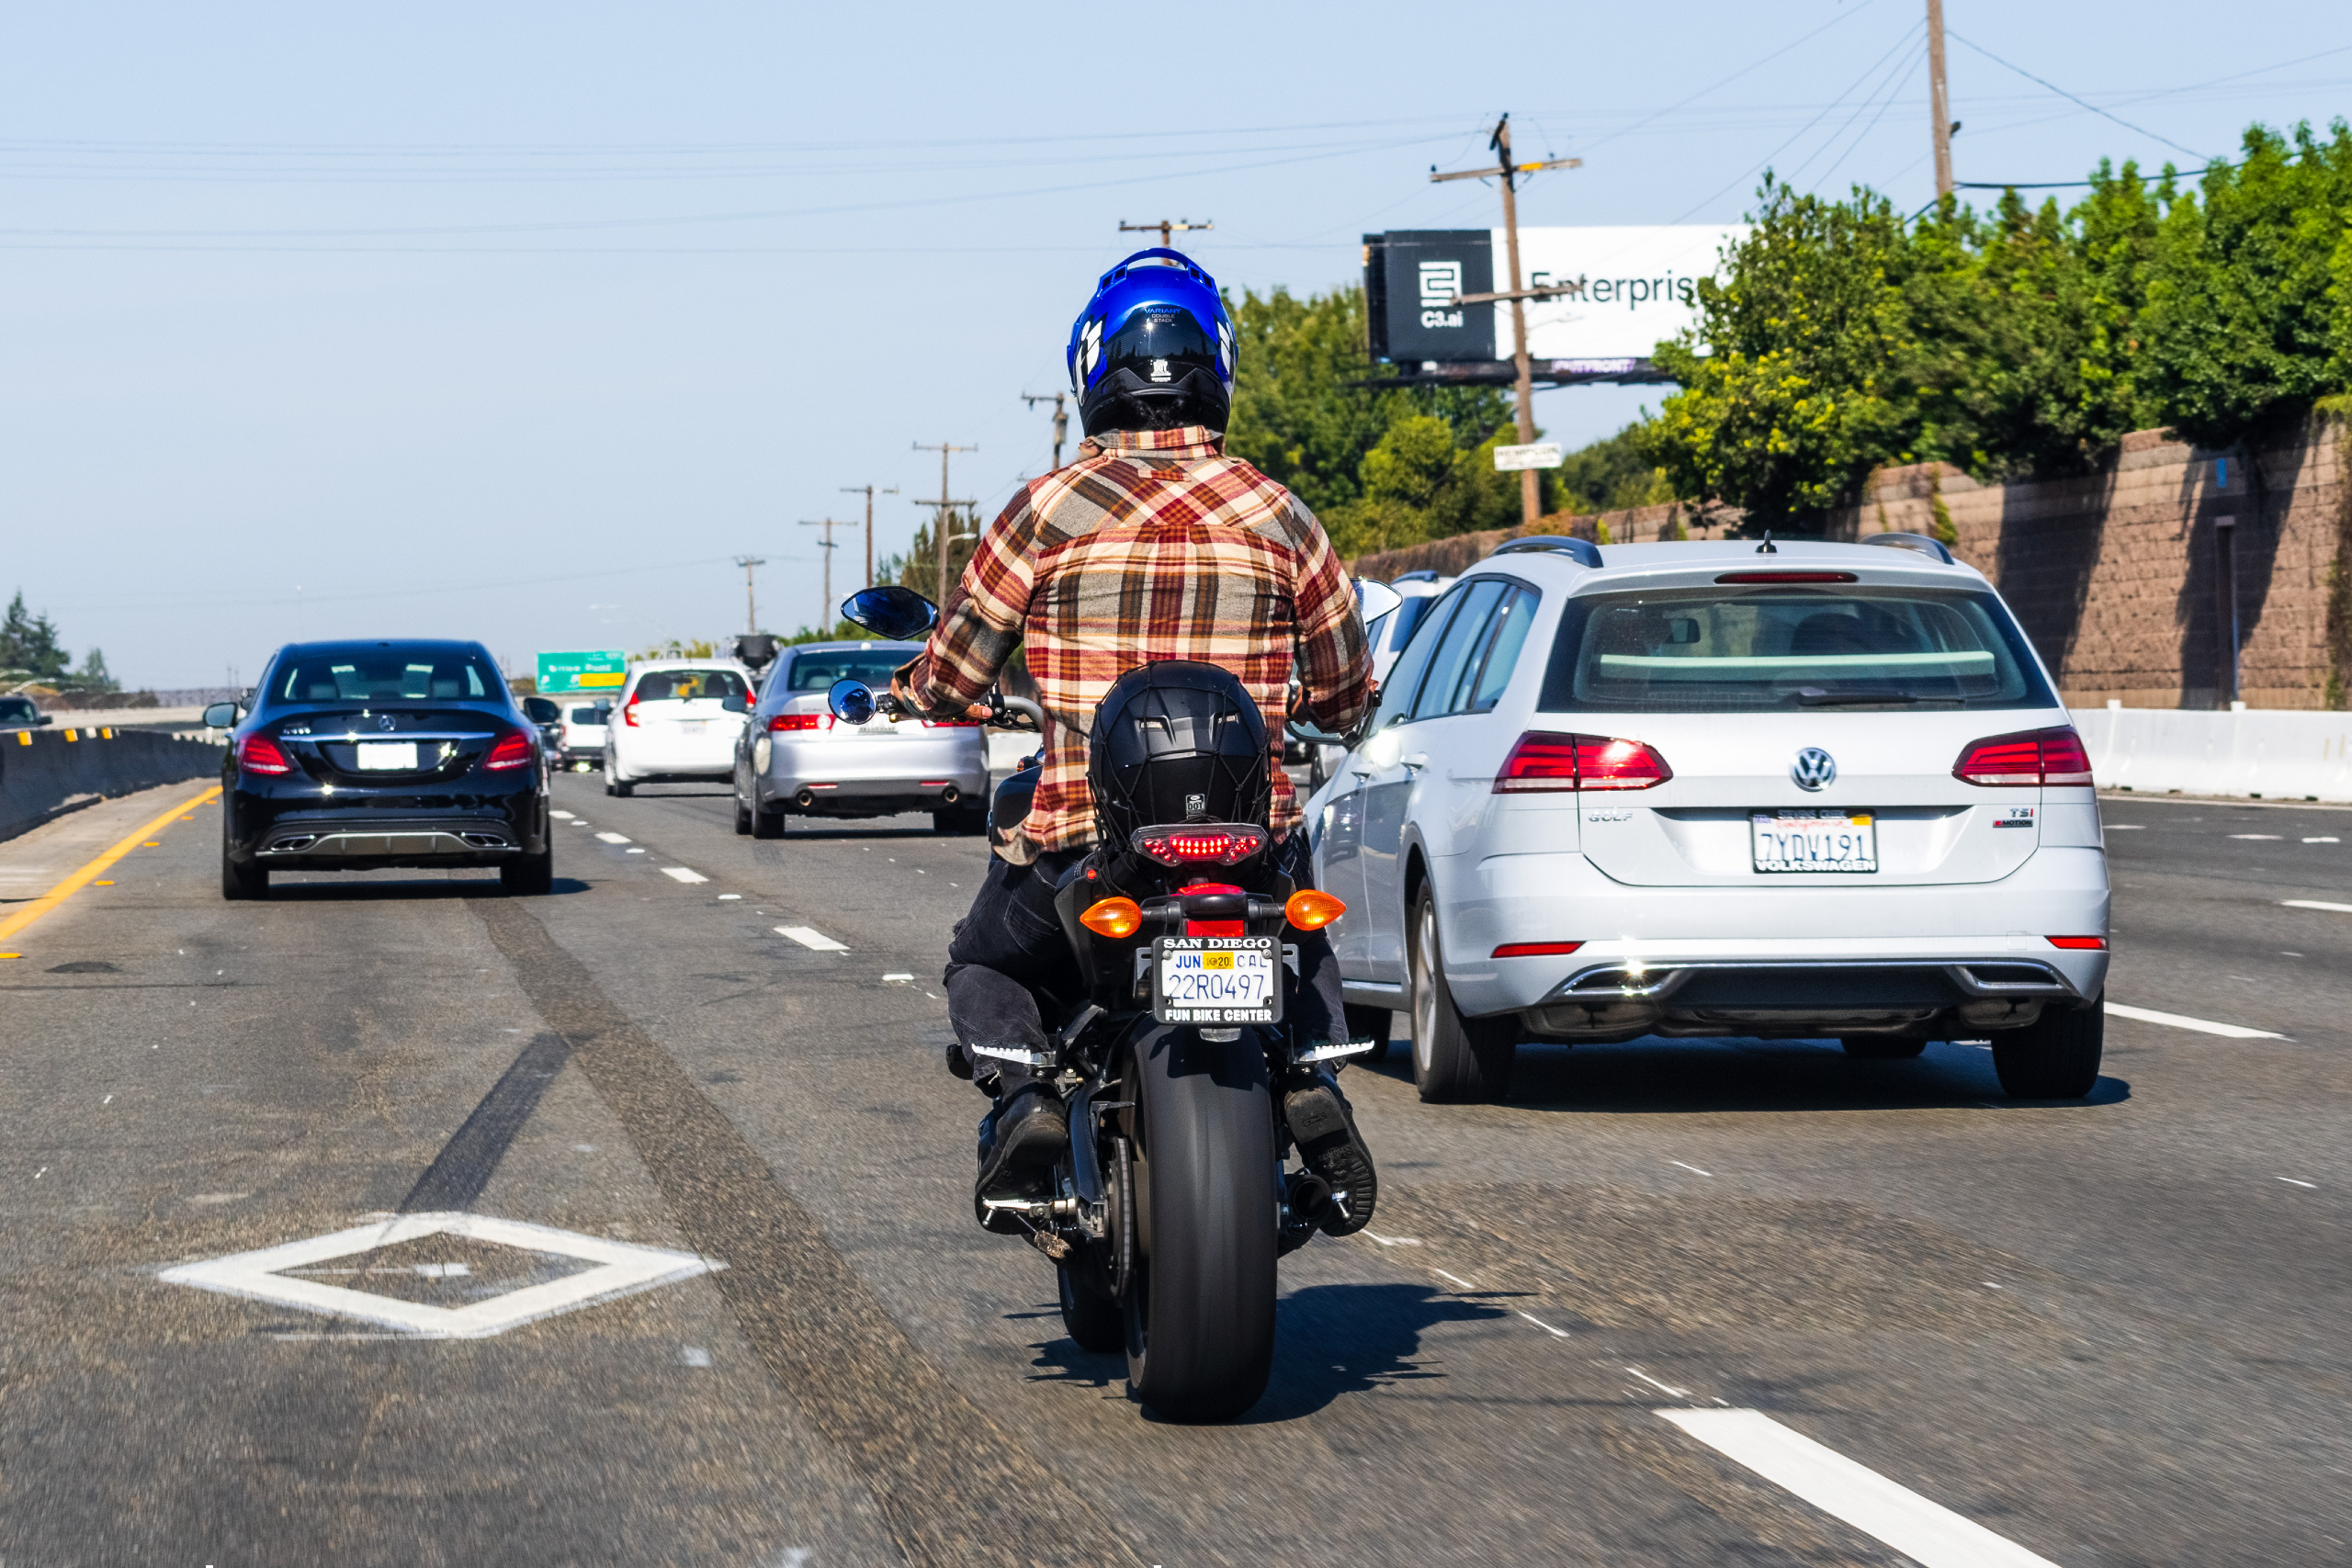 Do You Need Motorcycle Insurance?